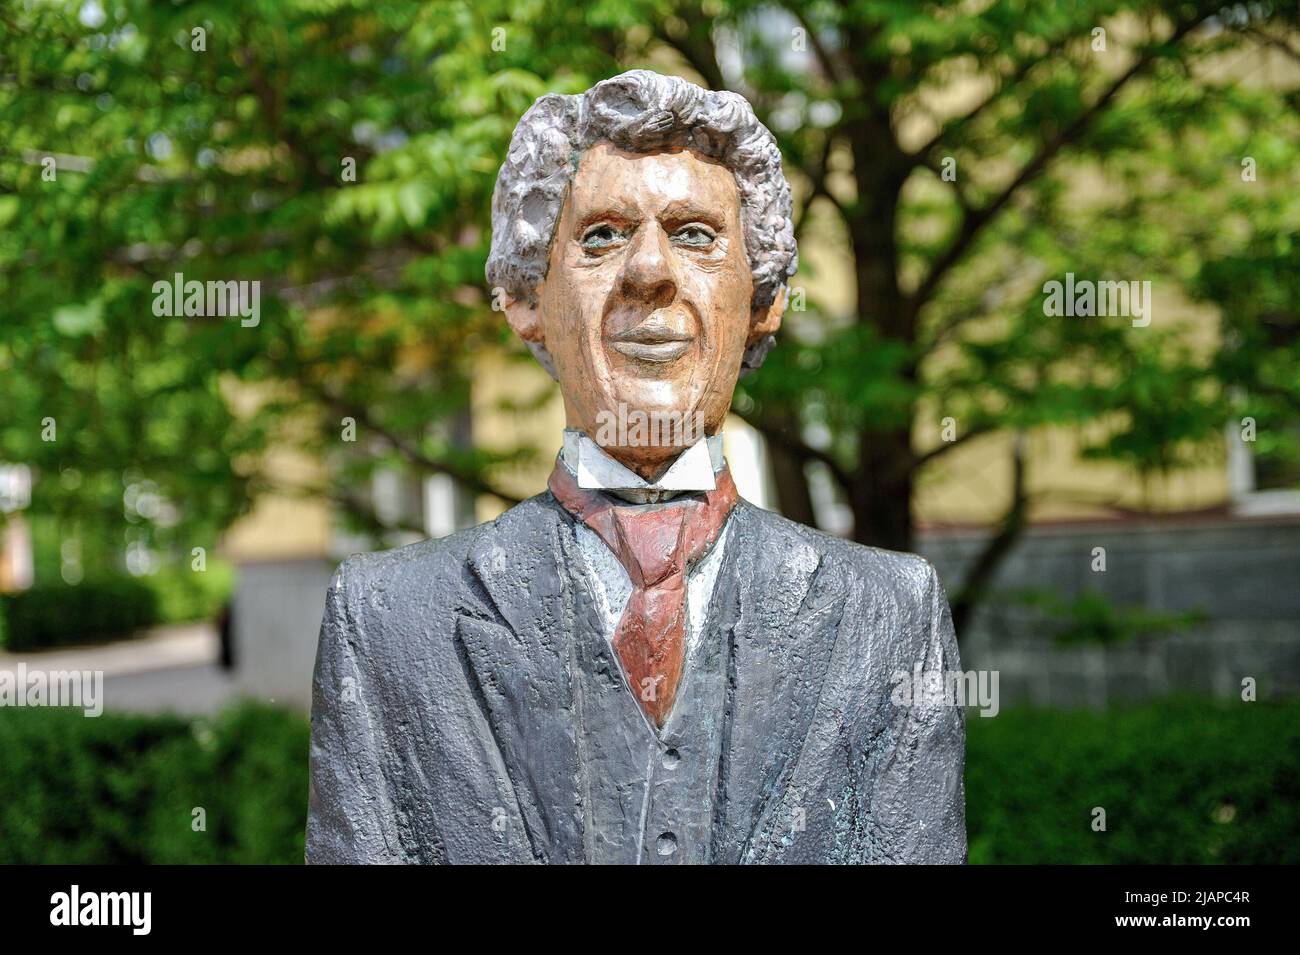 Sculpture by KG Bejemark of Swedish author and humorist Tage Danielsson in Linkoping, Sweden Stock Photo